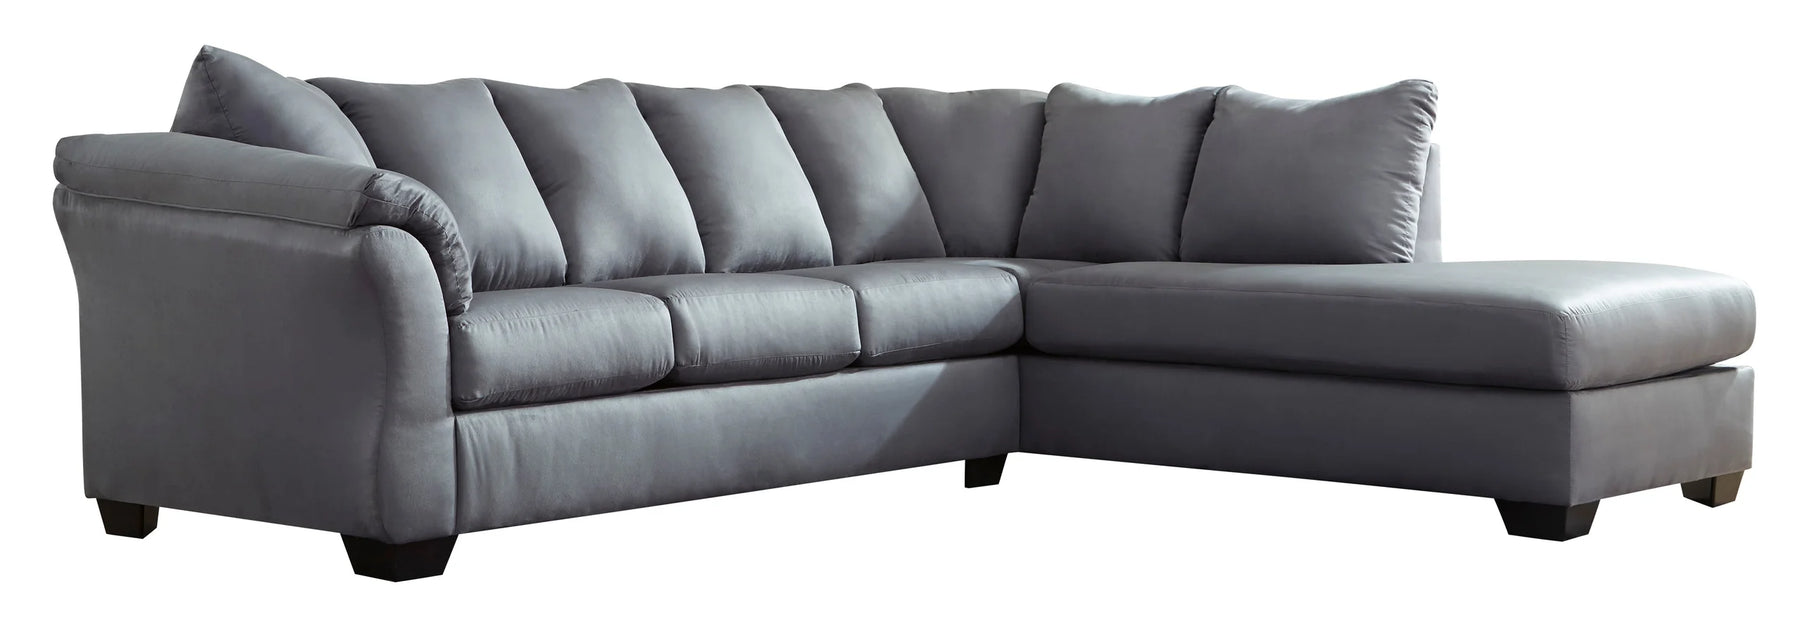 Ashley 750-09 Sectional RAF Chaise